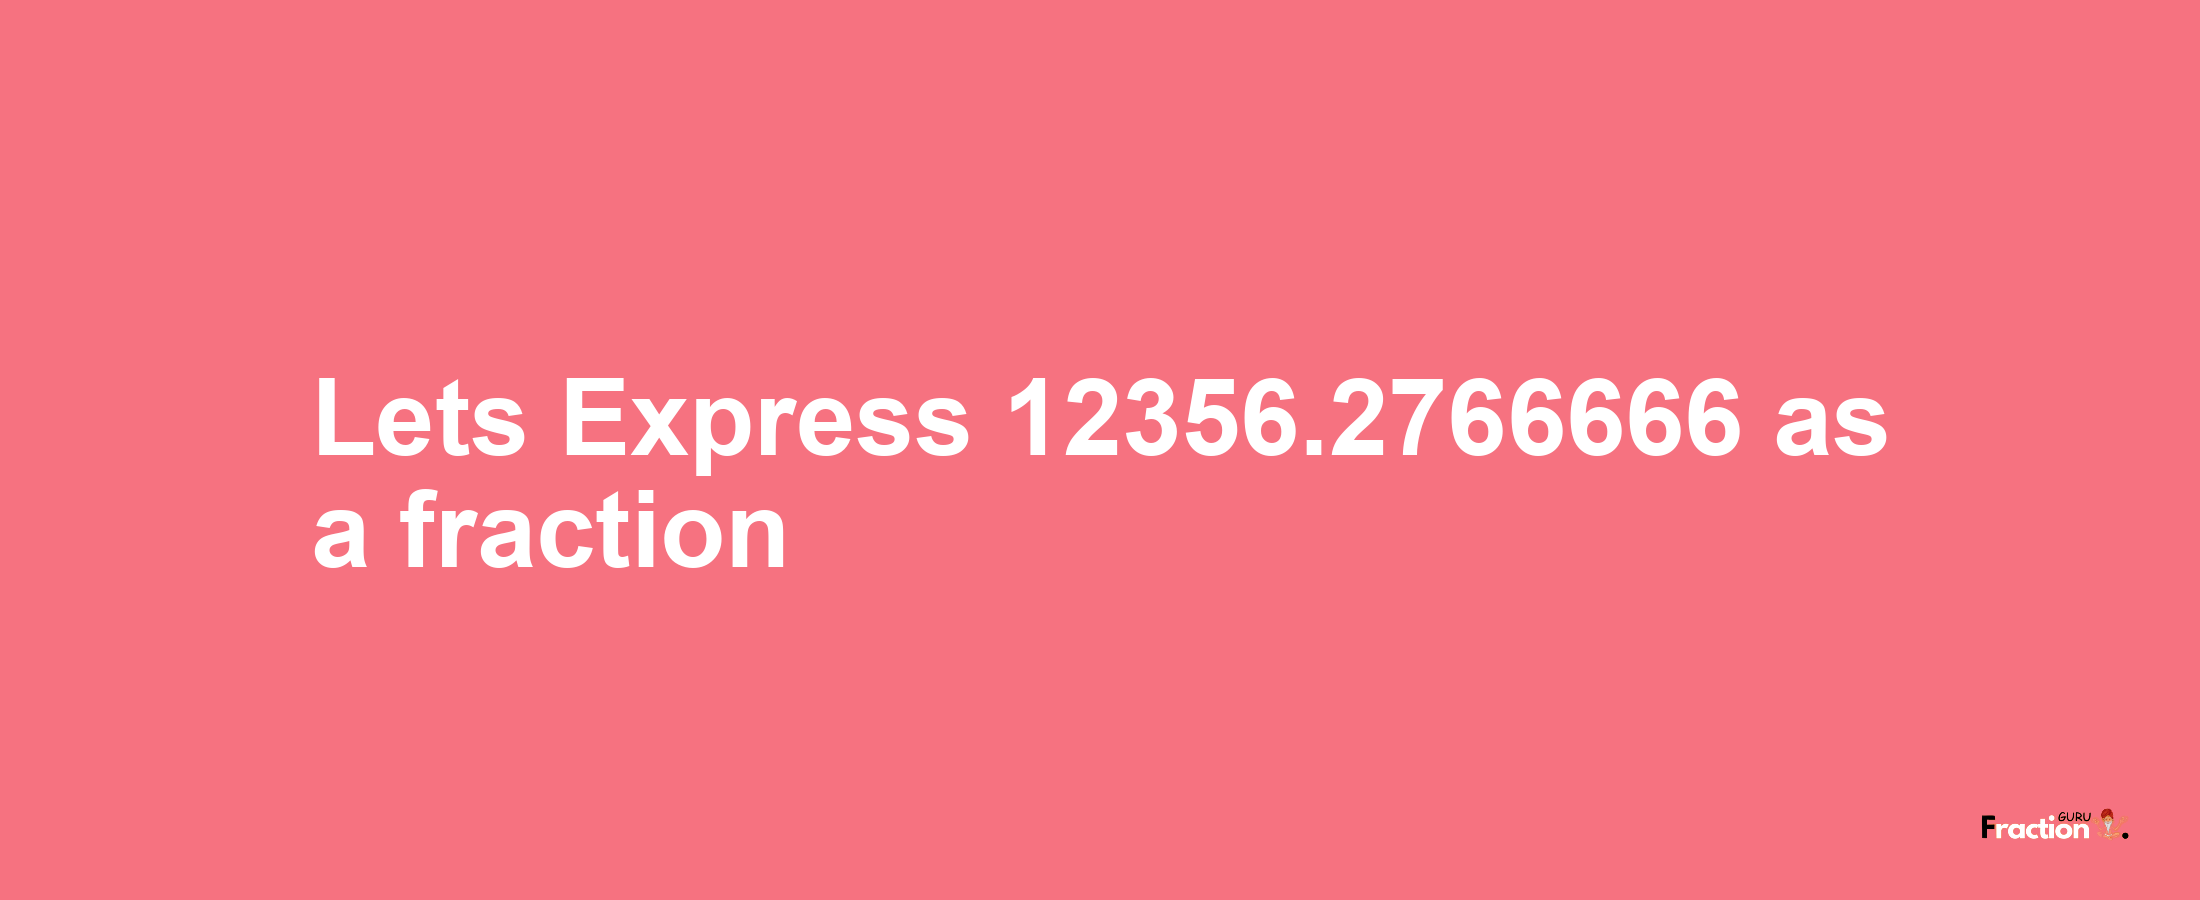 Lets Express 12356.2766666 as afraction